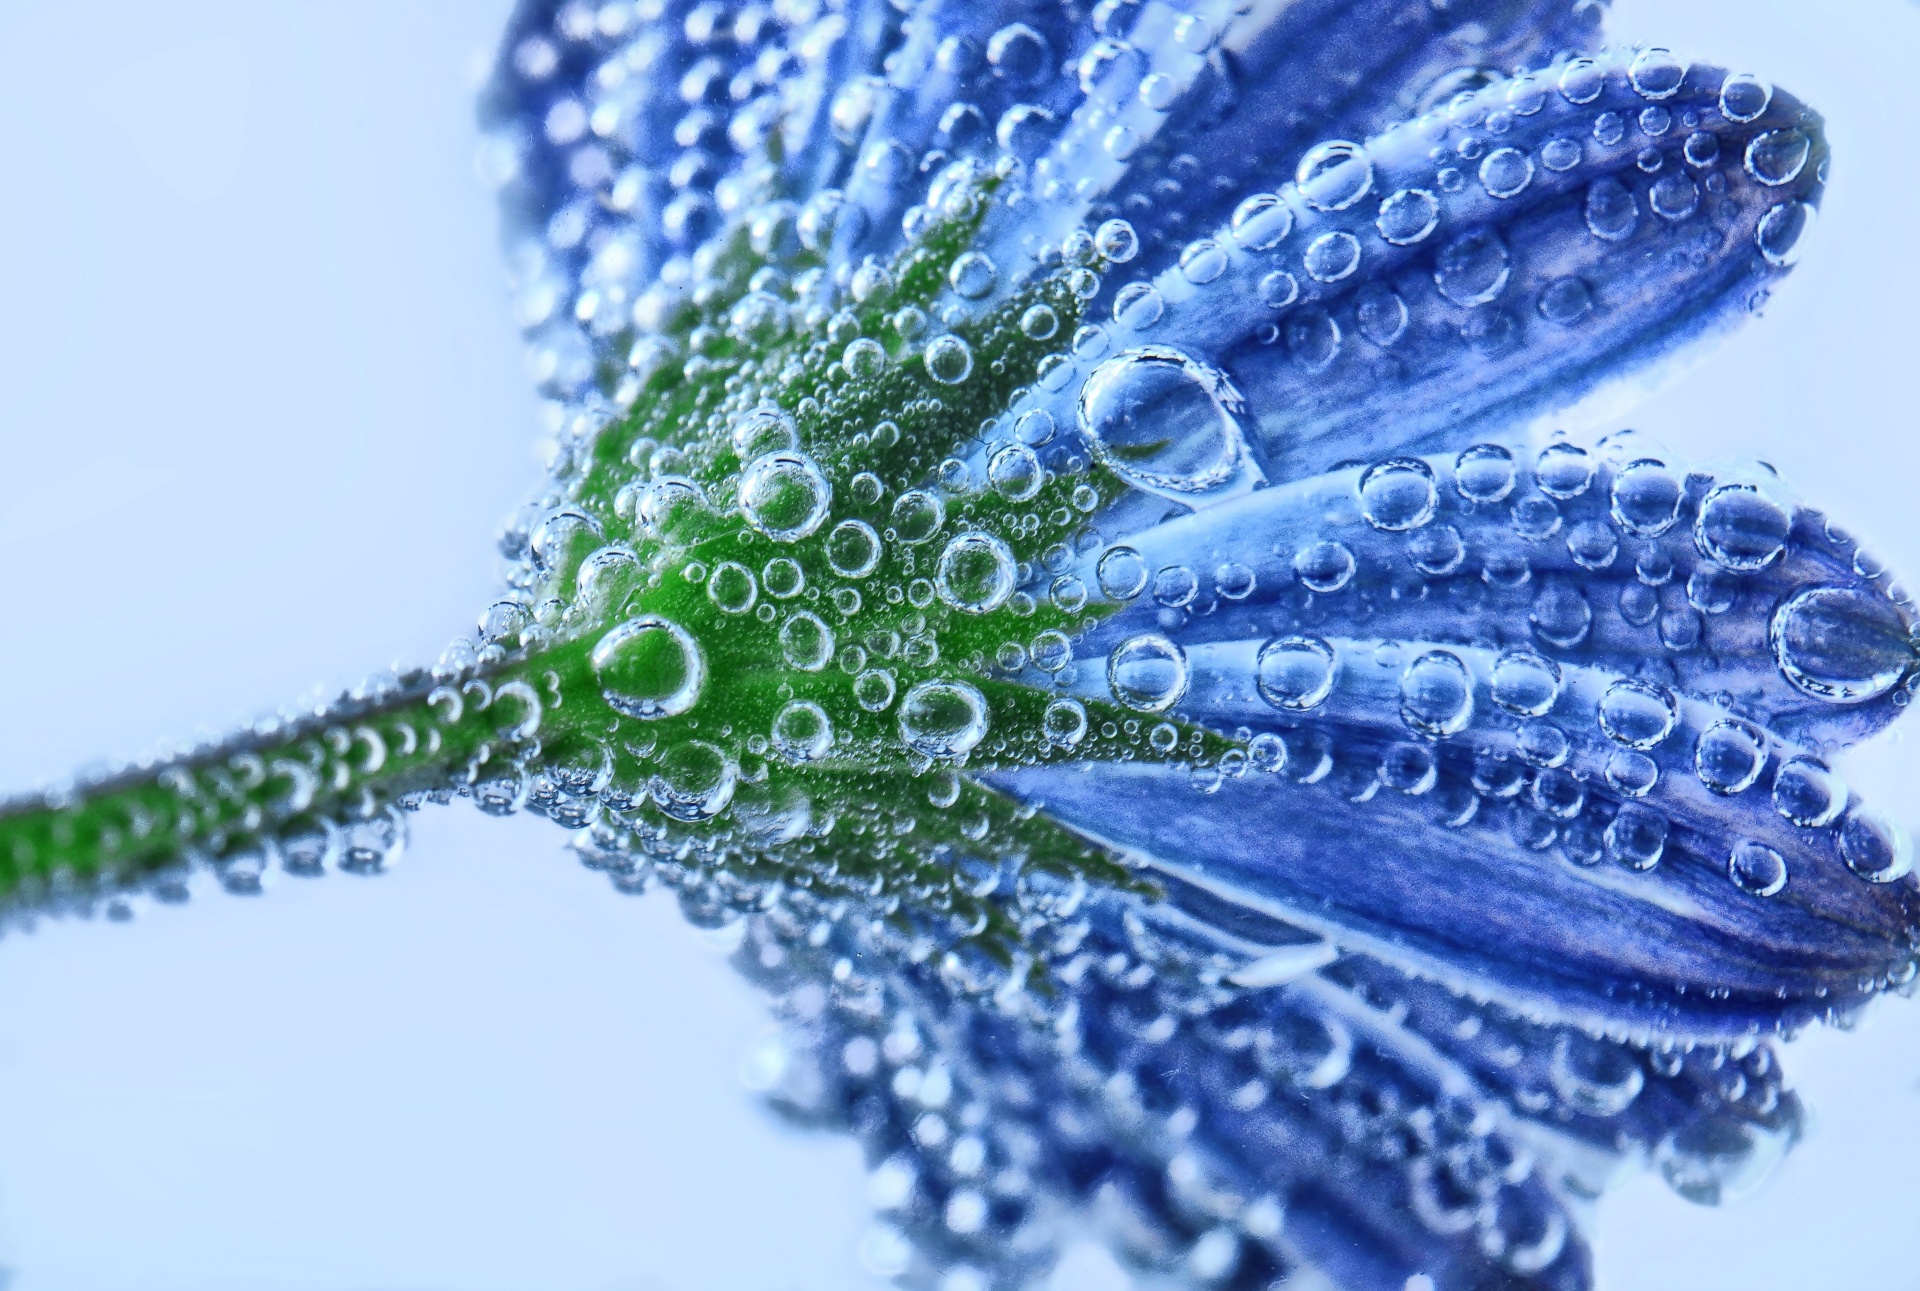 Flower flower water drop blue macro raindrop close wildflower cut flower Abstract surreal detail flower petals colors colorful water nature plant beaded background